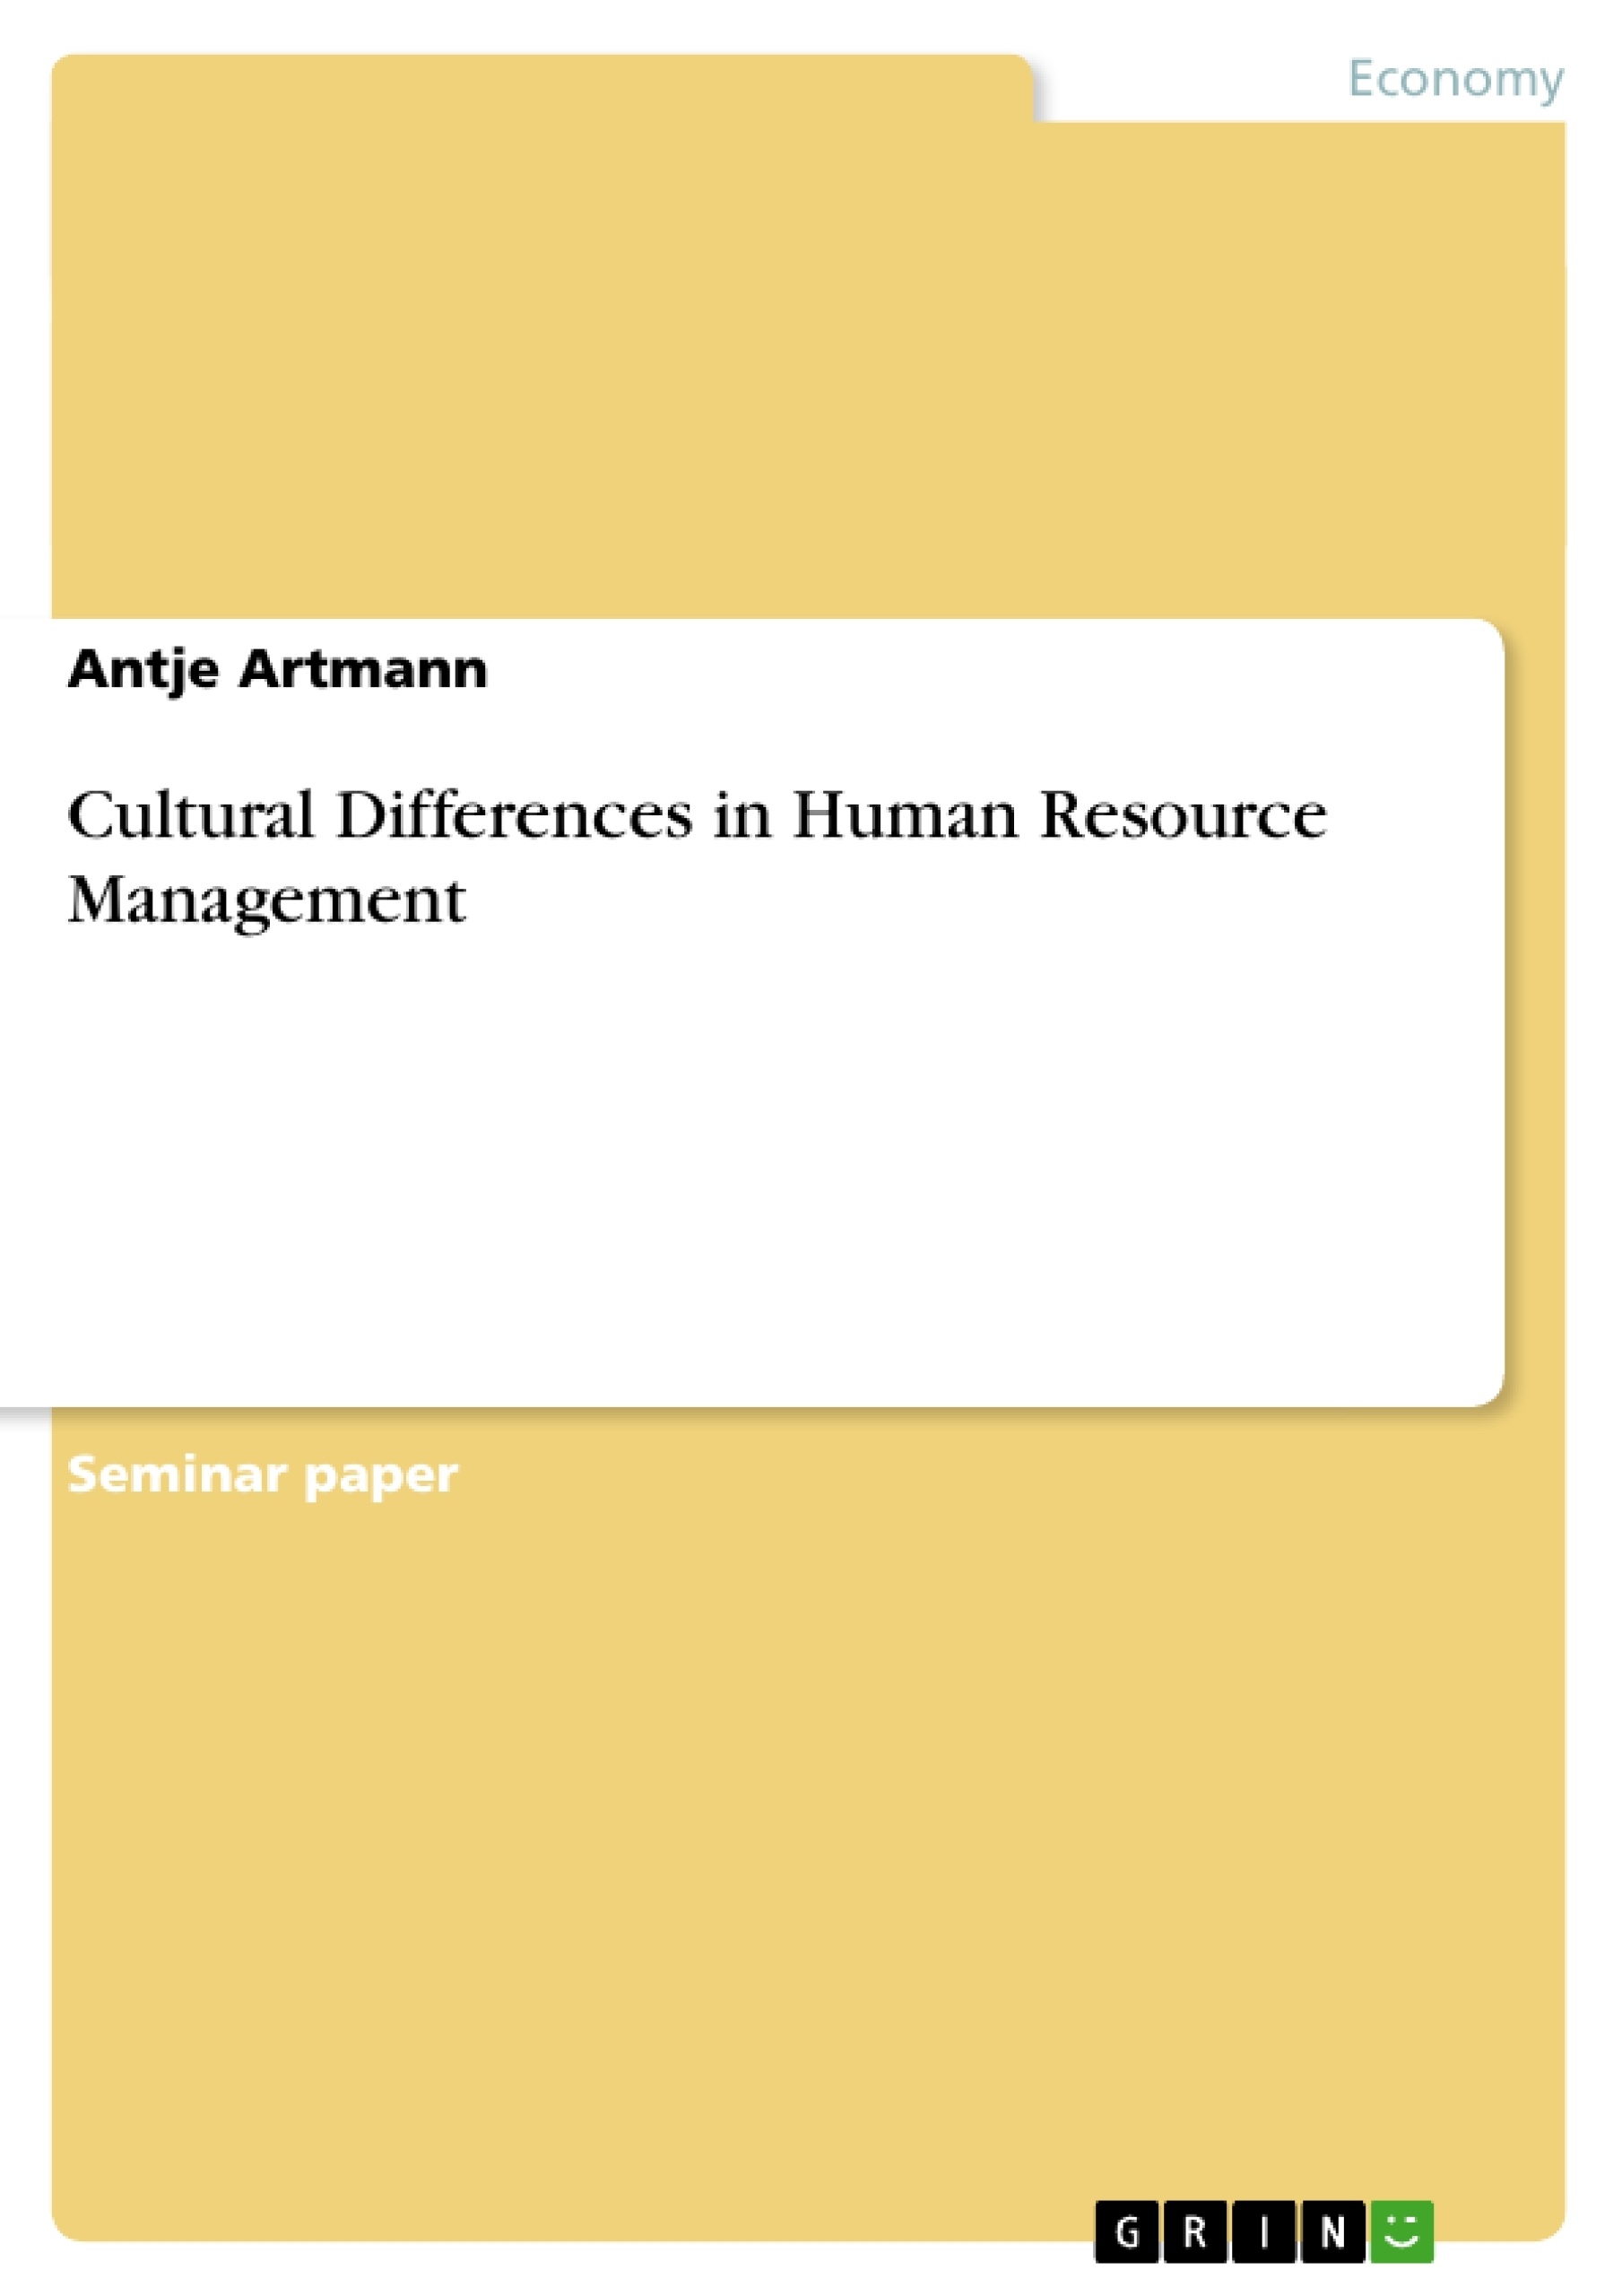 Title: Cultural Differences in Human Resource Management